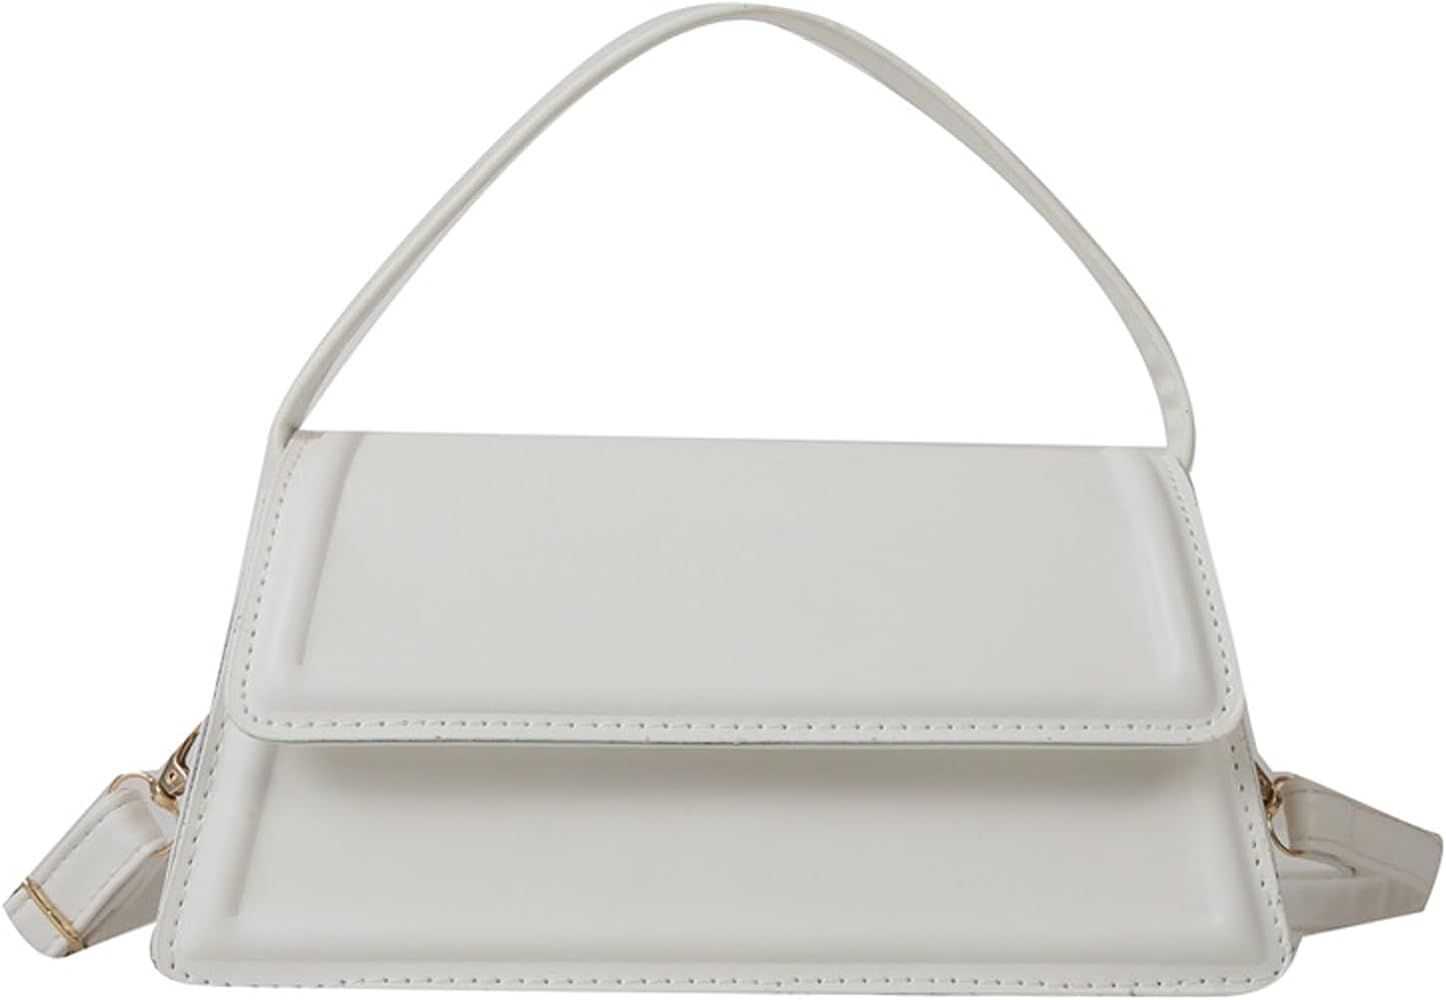 Women‘s’ Shoulder Bag Small Crossbody Bag with Removable Strap PU Leather Handbags (White) | Amazon (US)